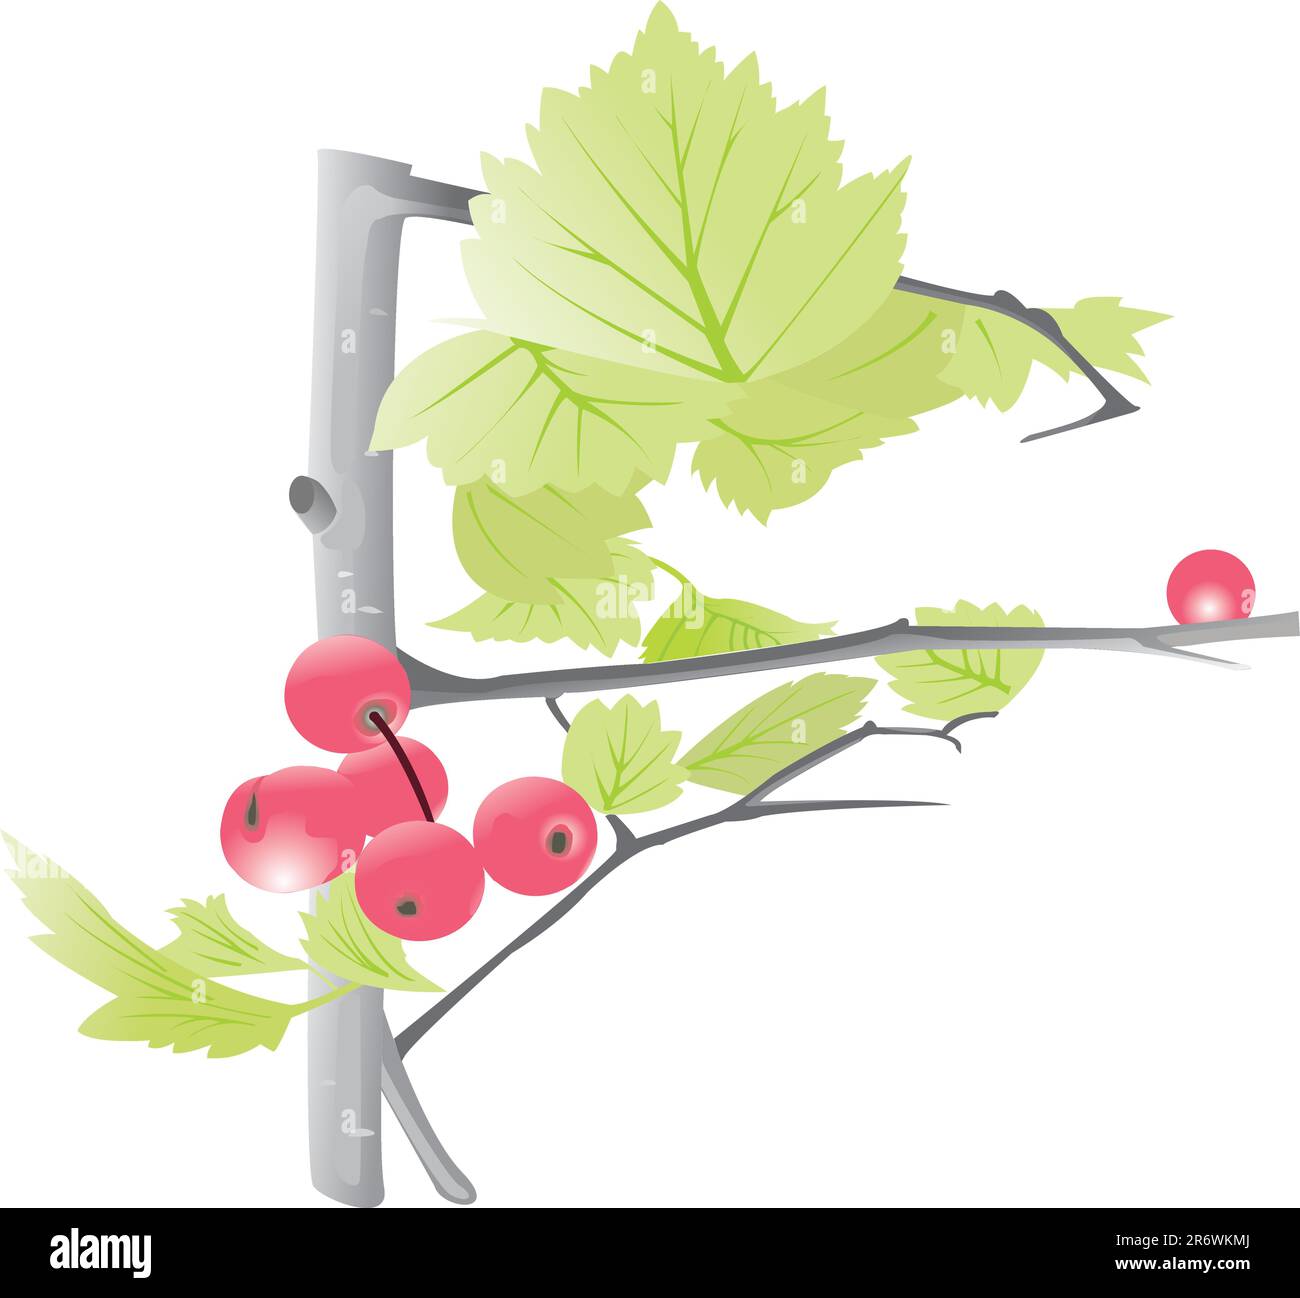 Illustation with berries on a tree with leaves Stock Vector